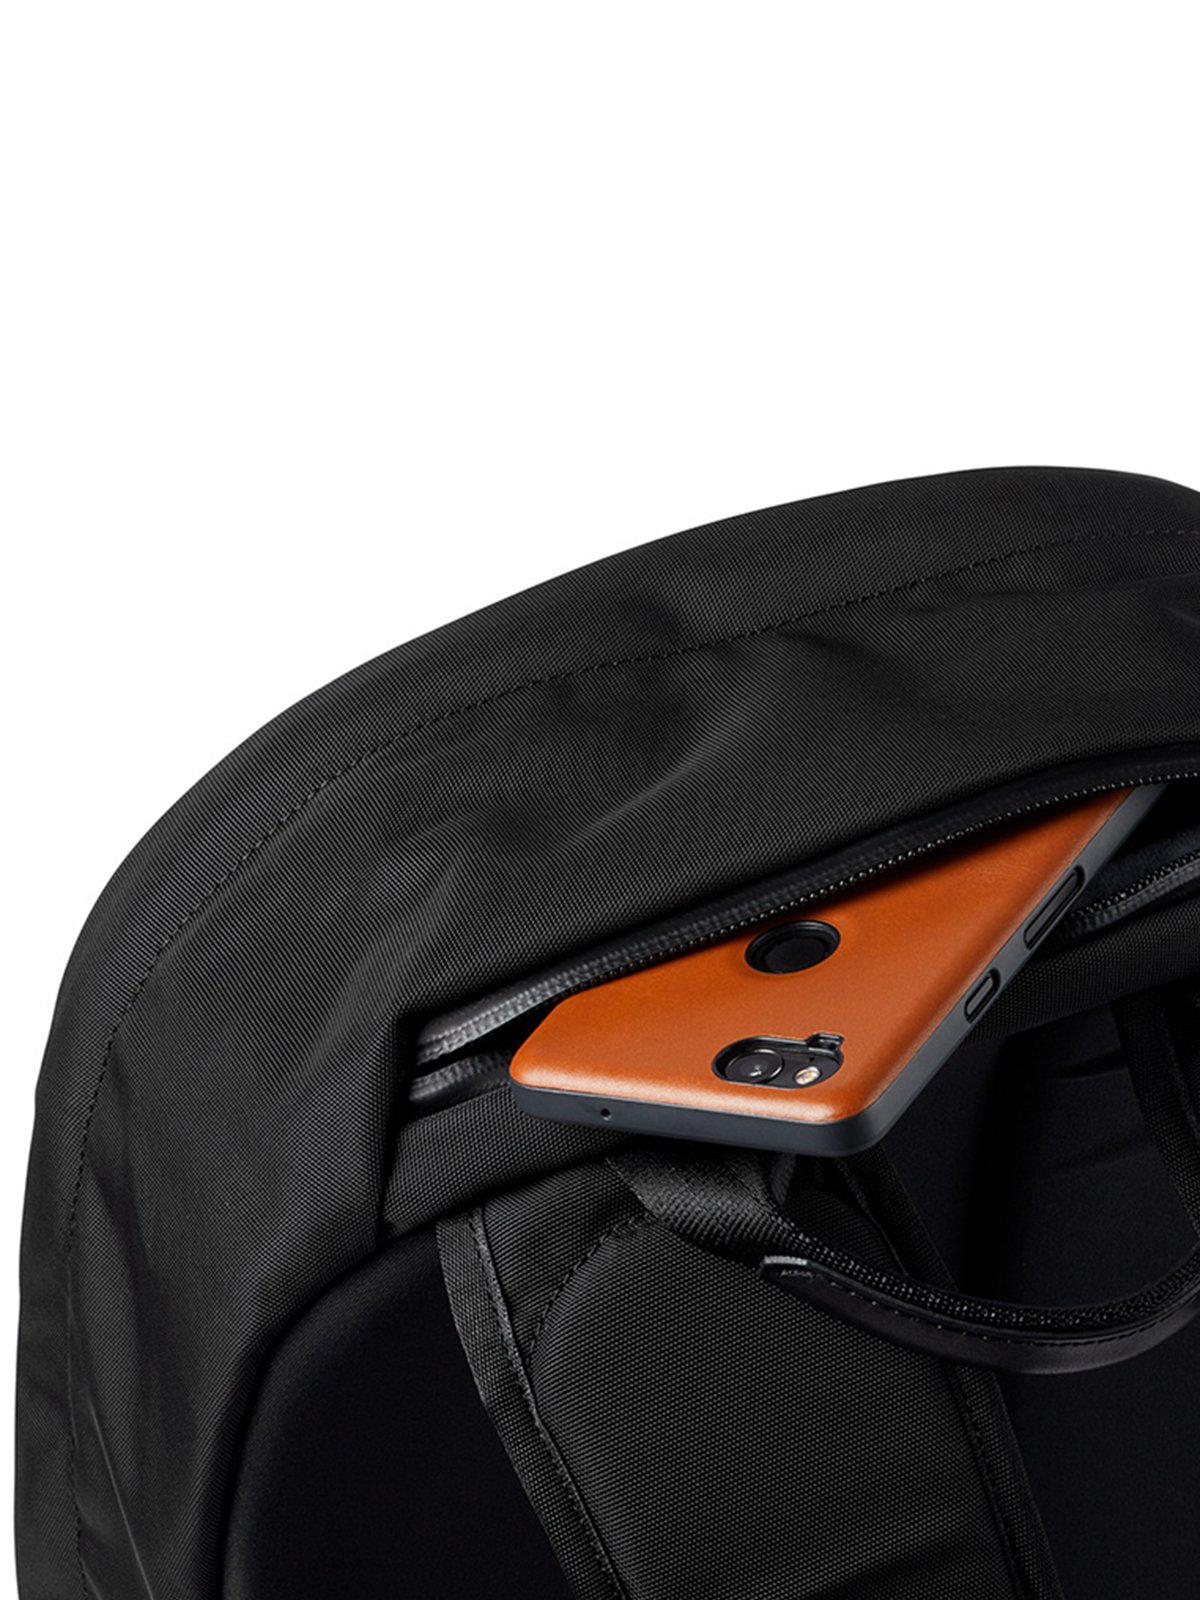 Bellroy Classic Backpack Black - MORE by Morello Indonesia